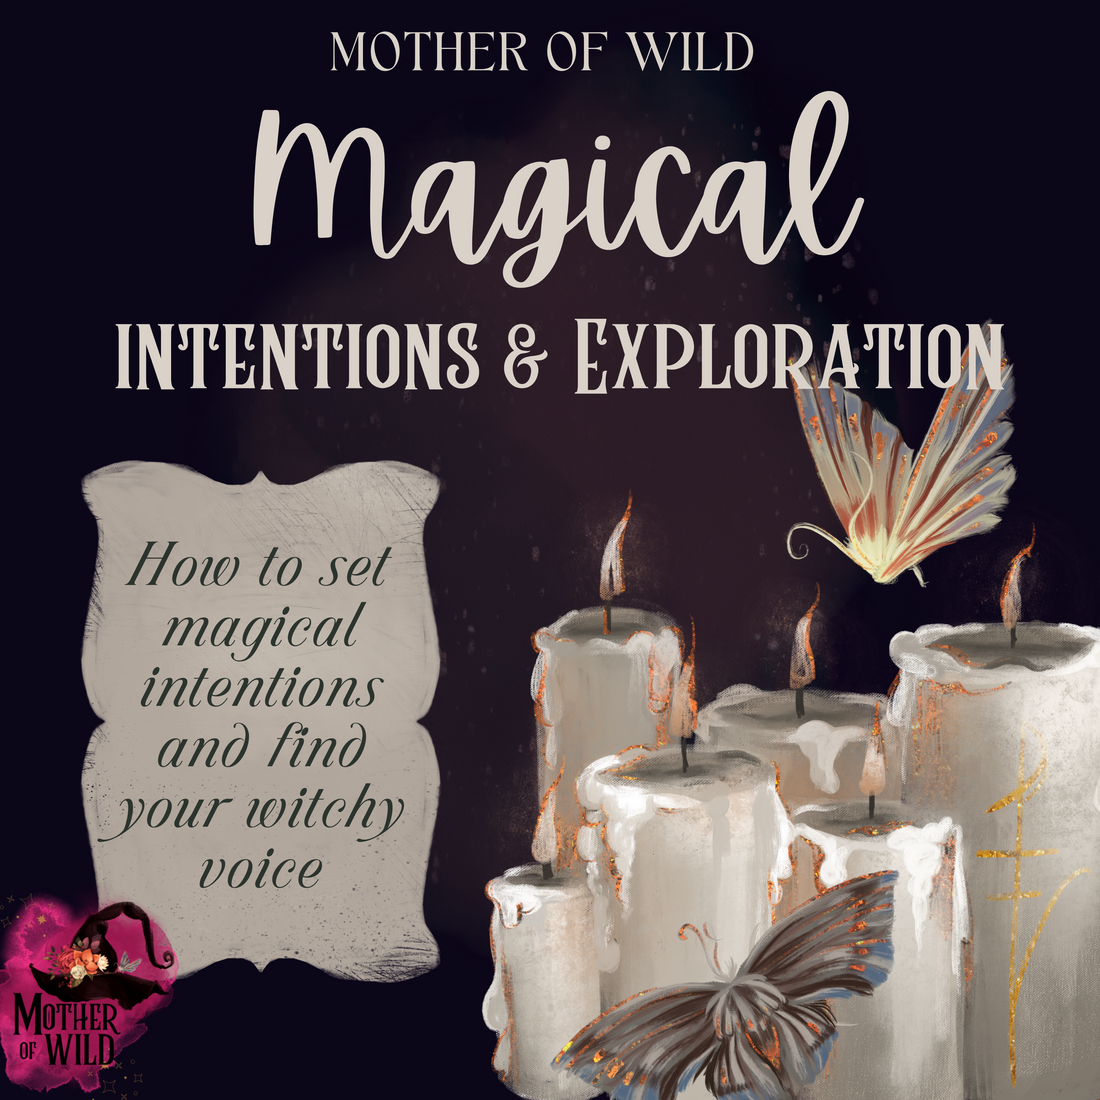 Witchy Intentions & Exploration - Part 1